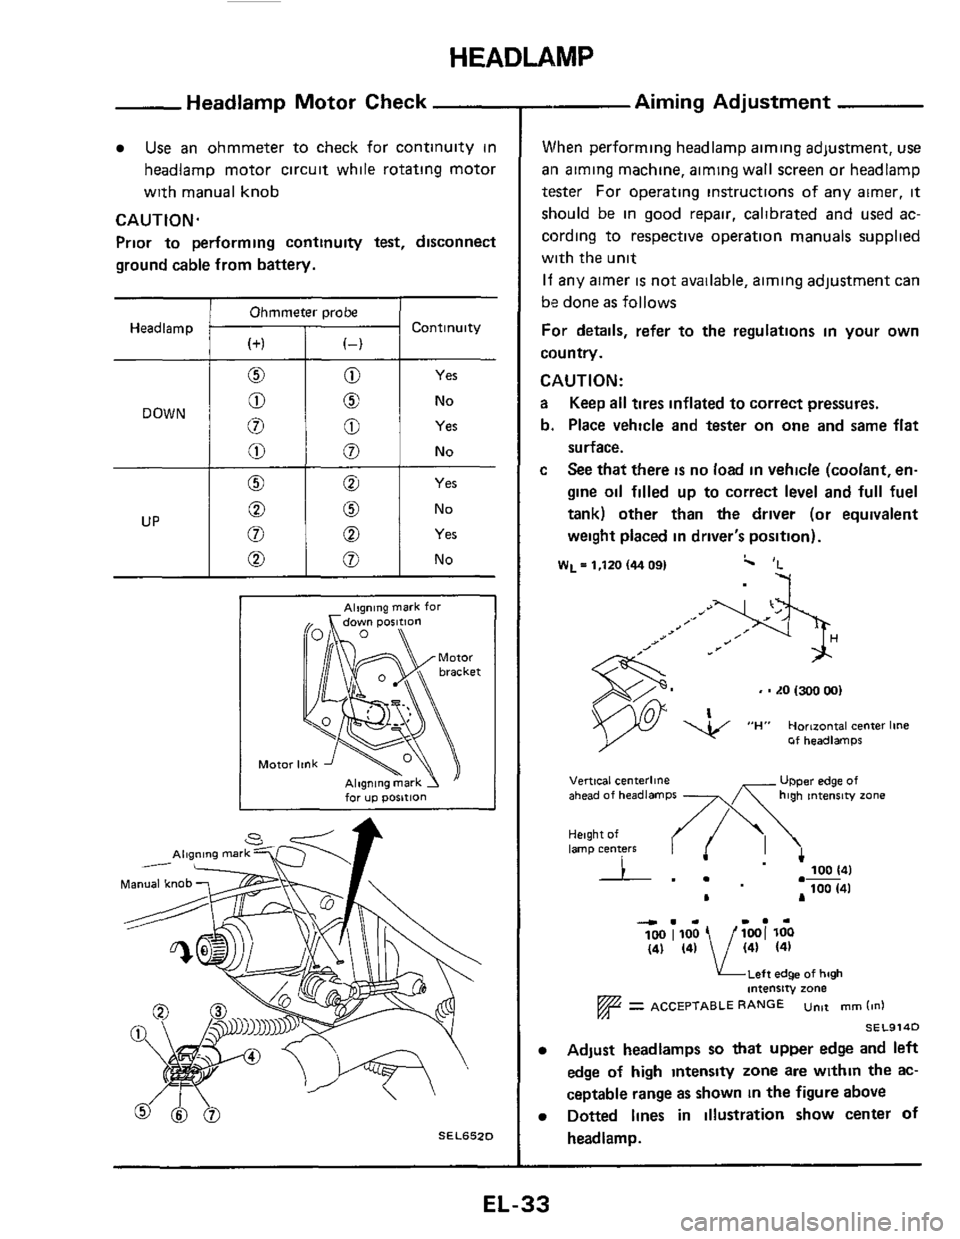 NISSAN 300ZX 1984 Z31 Electrical System Owners Guide HEADLAMP 
0 
0 
Headlamp Motor Check 
0 No 
8 Yes 
Use an ohmmeter  to check  for  continuity  in 
headlamp  motor circuit while rotating  motor 
with  manual  knob 
CAUTION. 
Prior  to performing  co